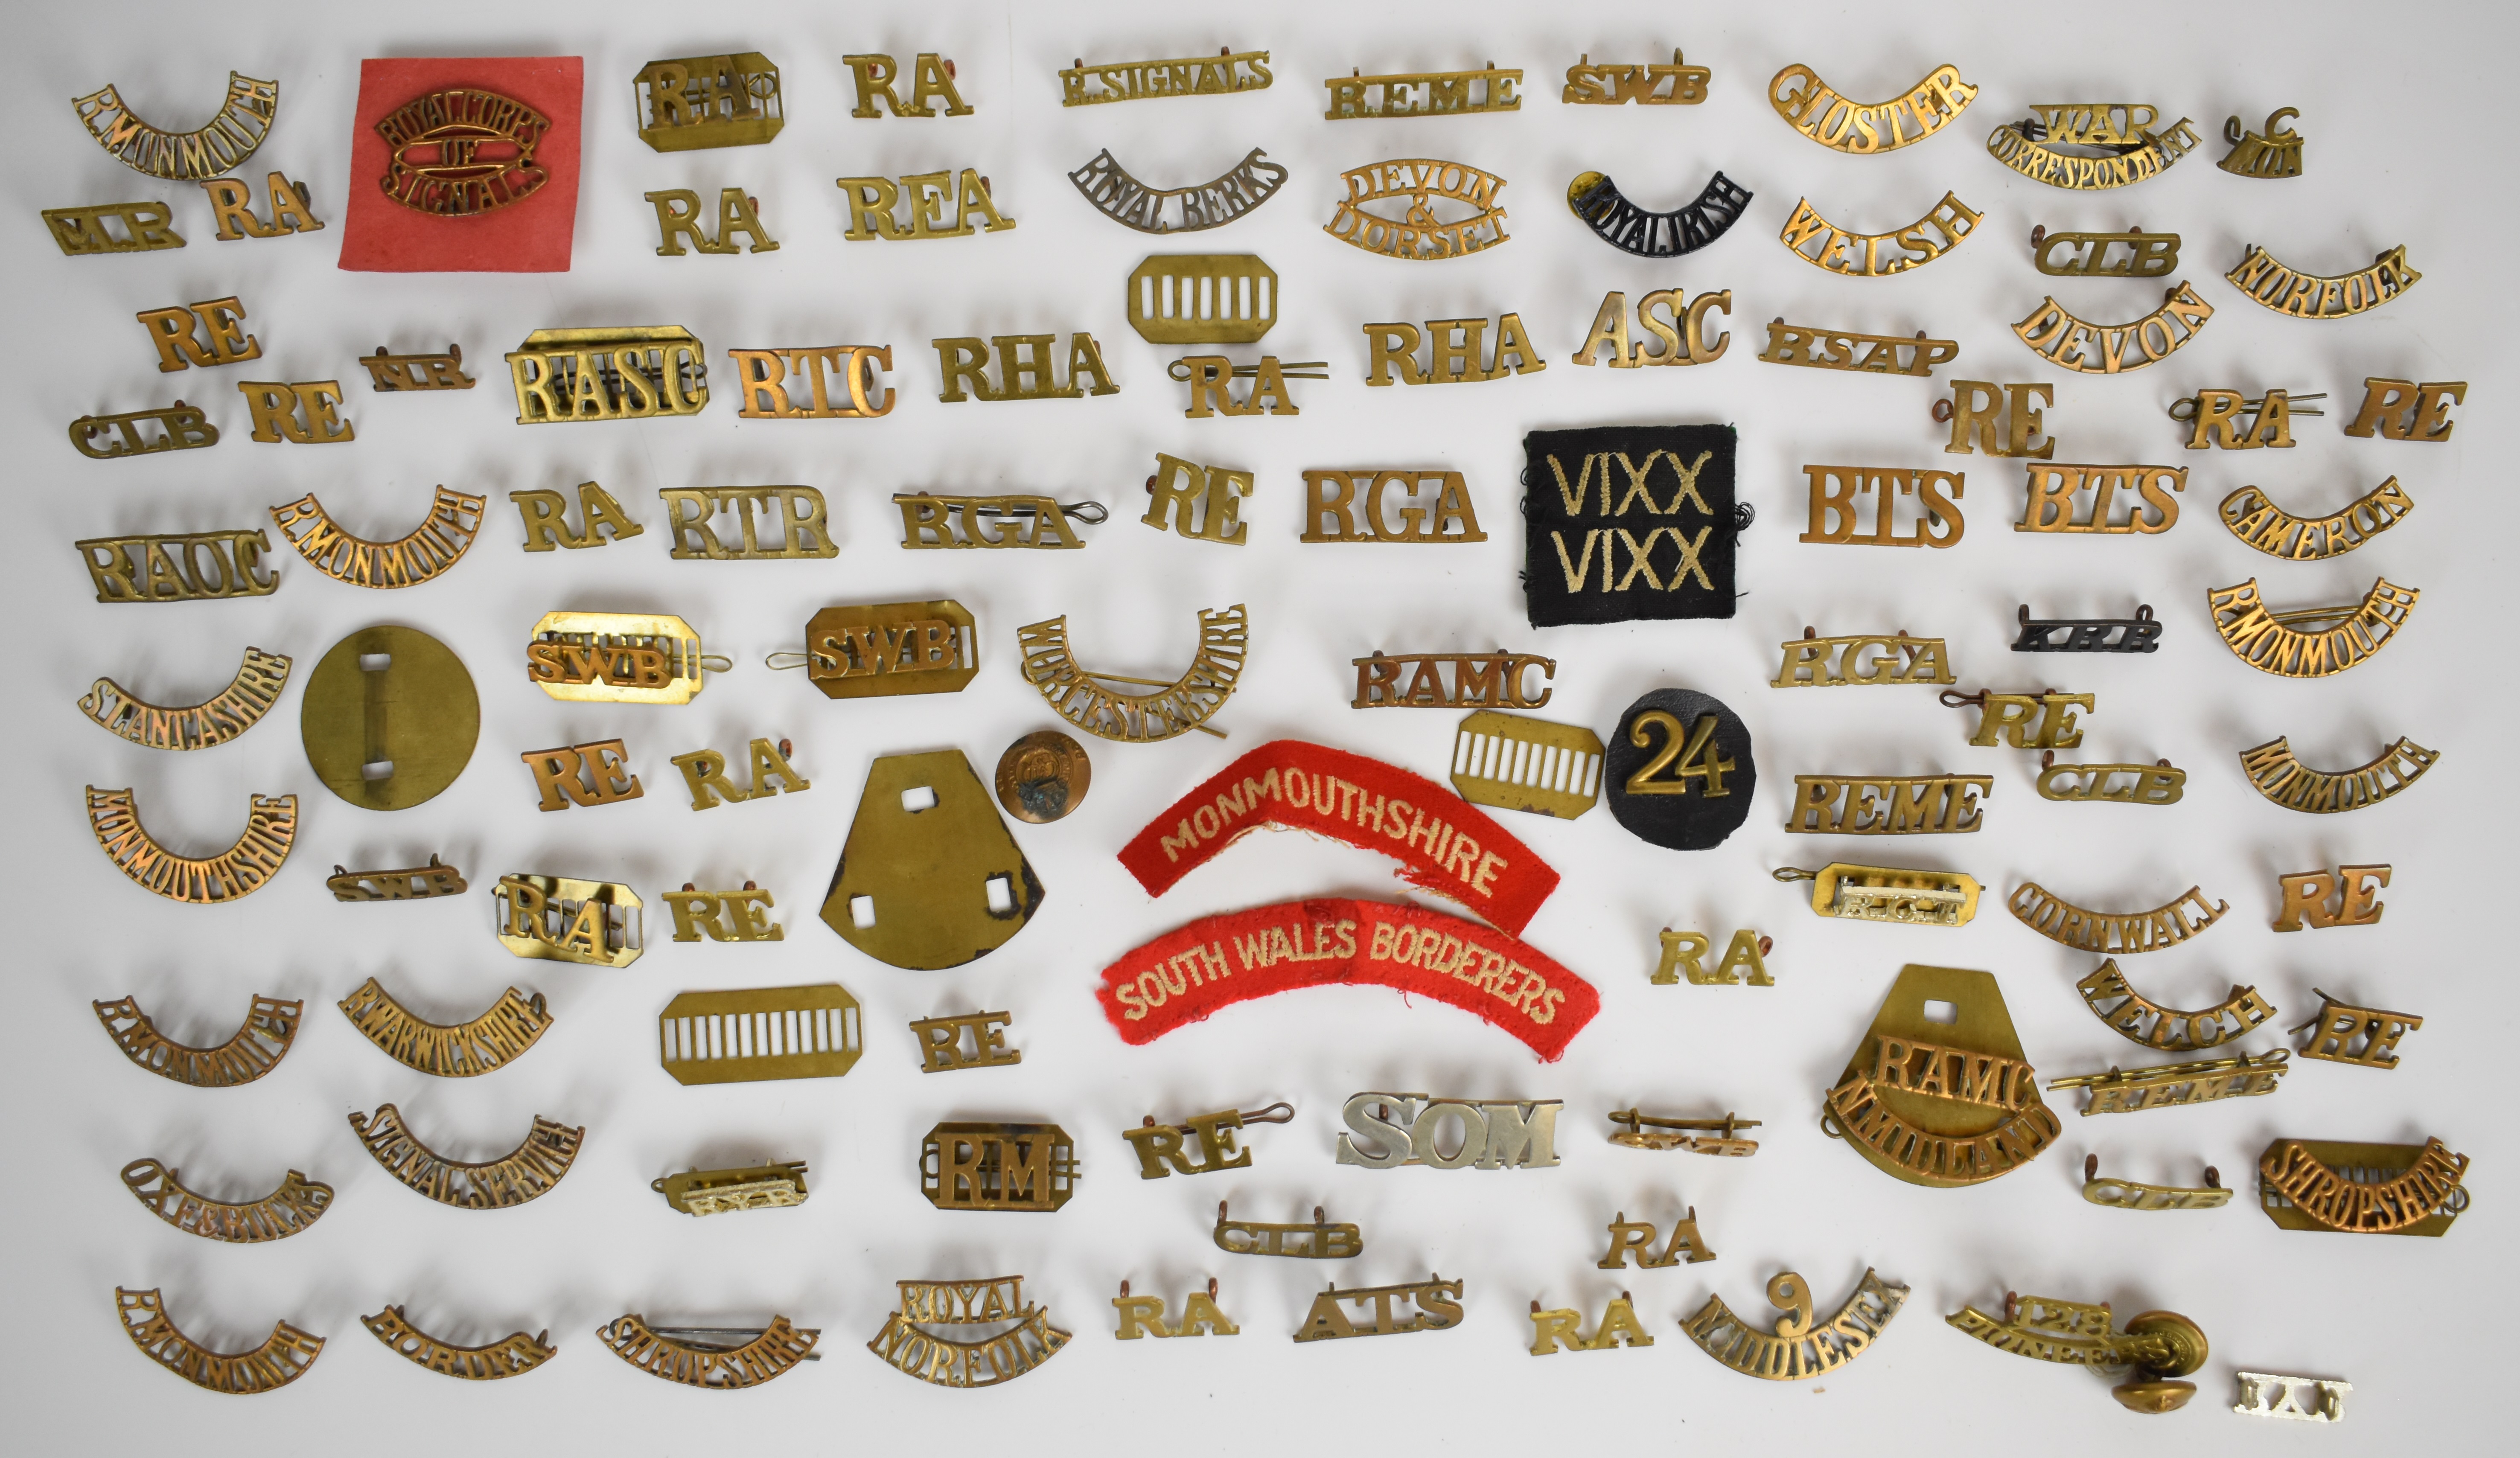 Large collection of approximately 90 British Army shoulder titles including 9th Middlesex, - Image 4 of 6